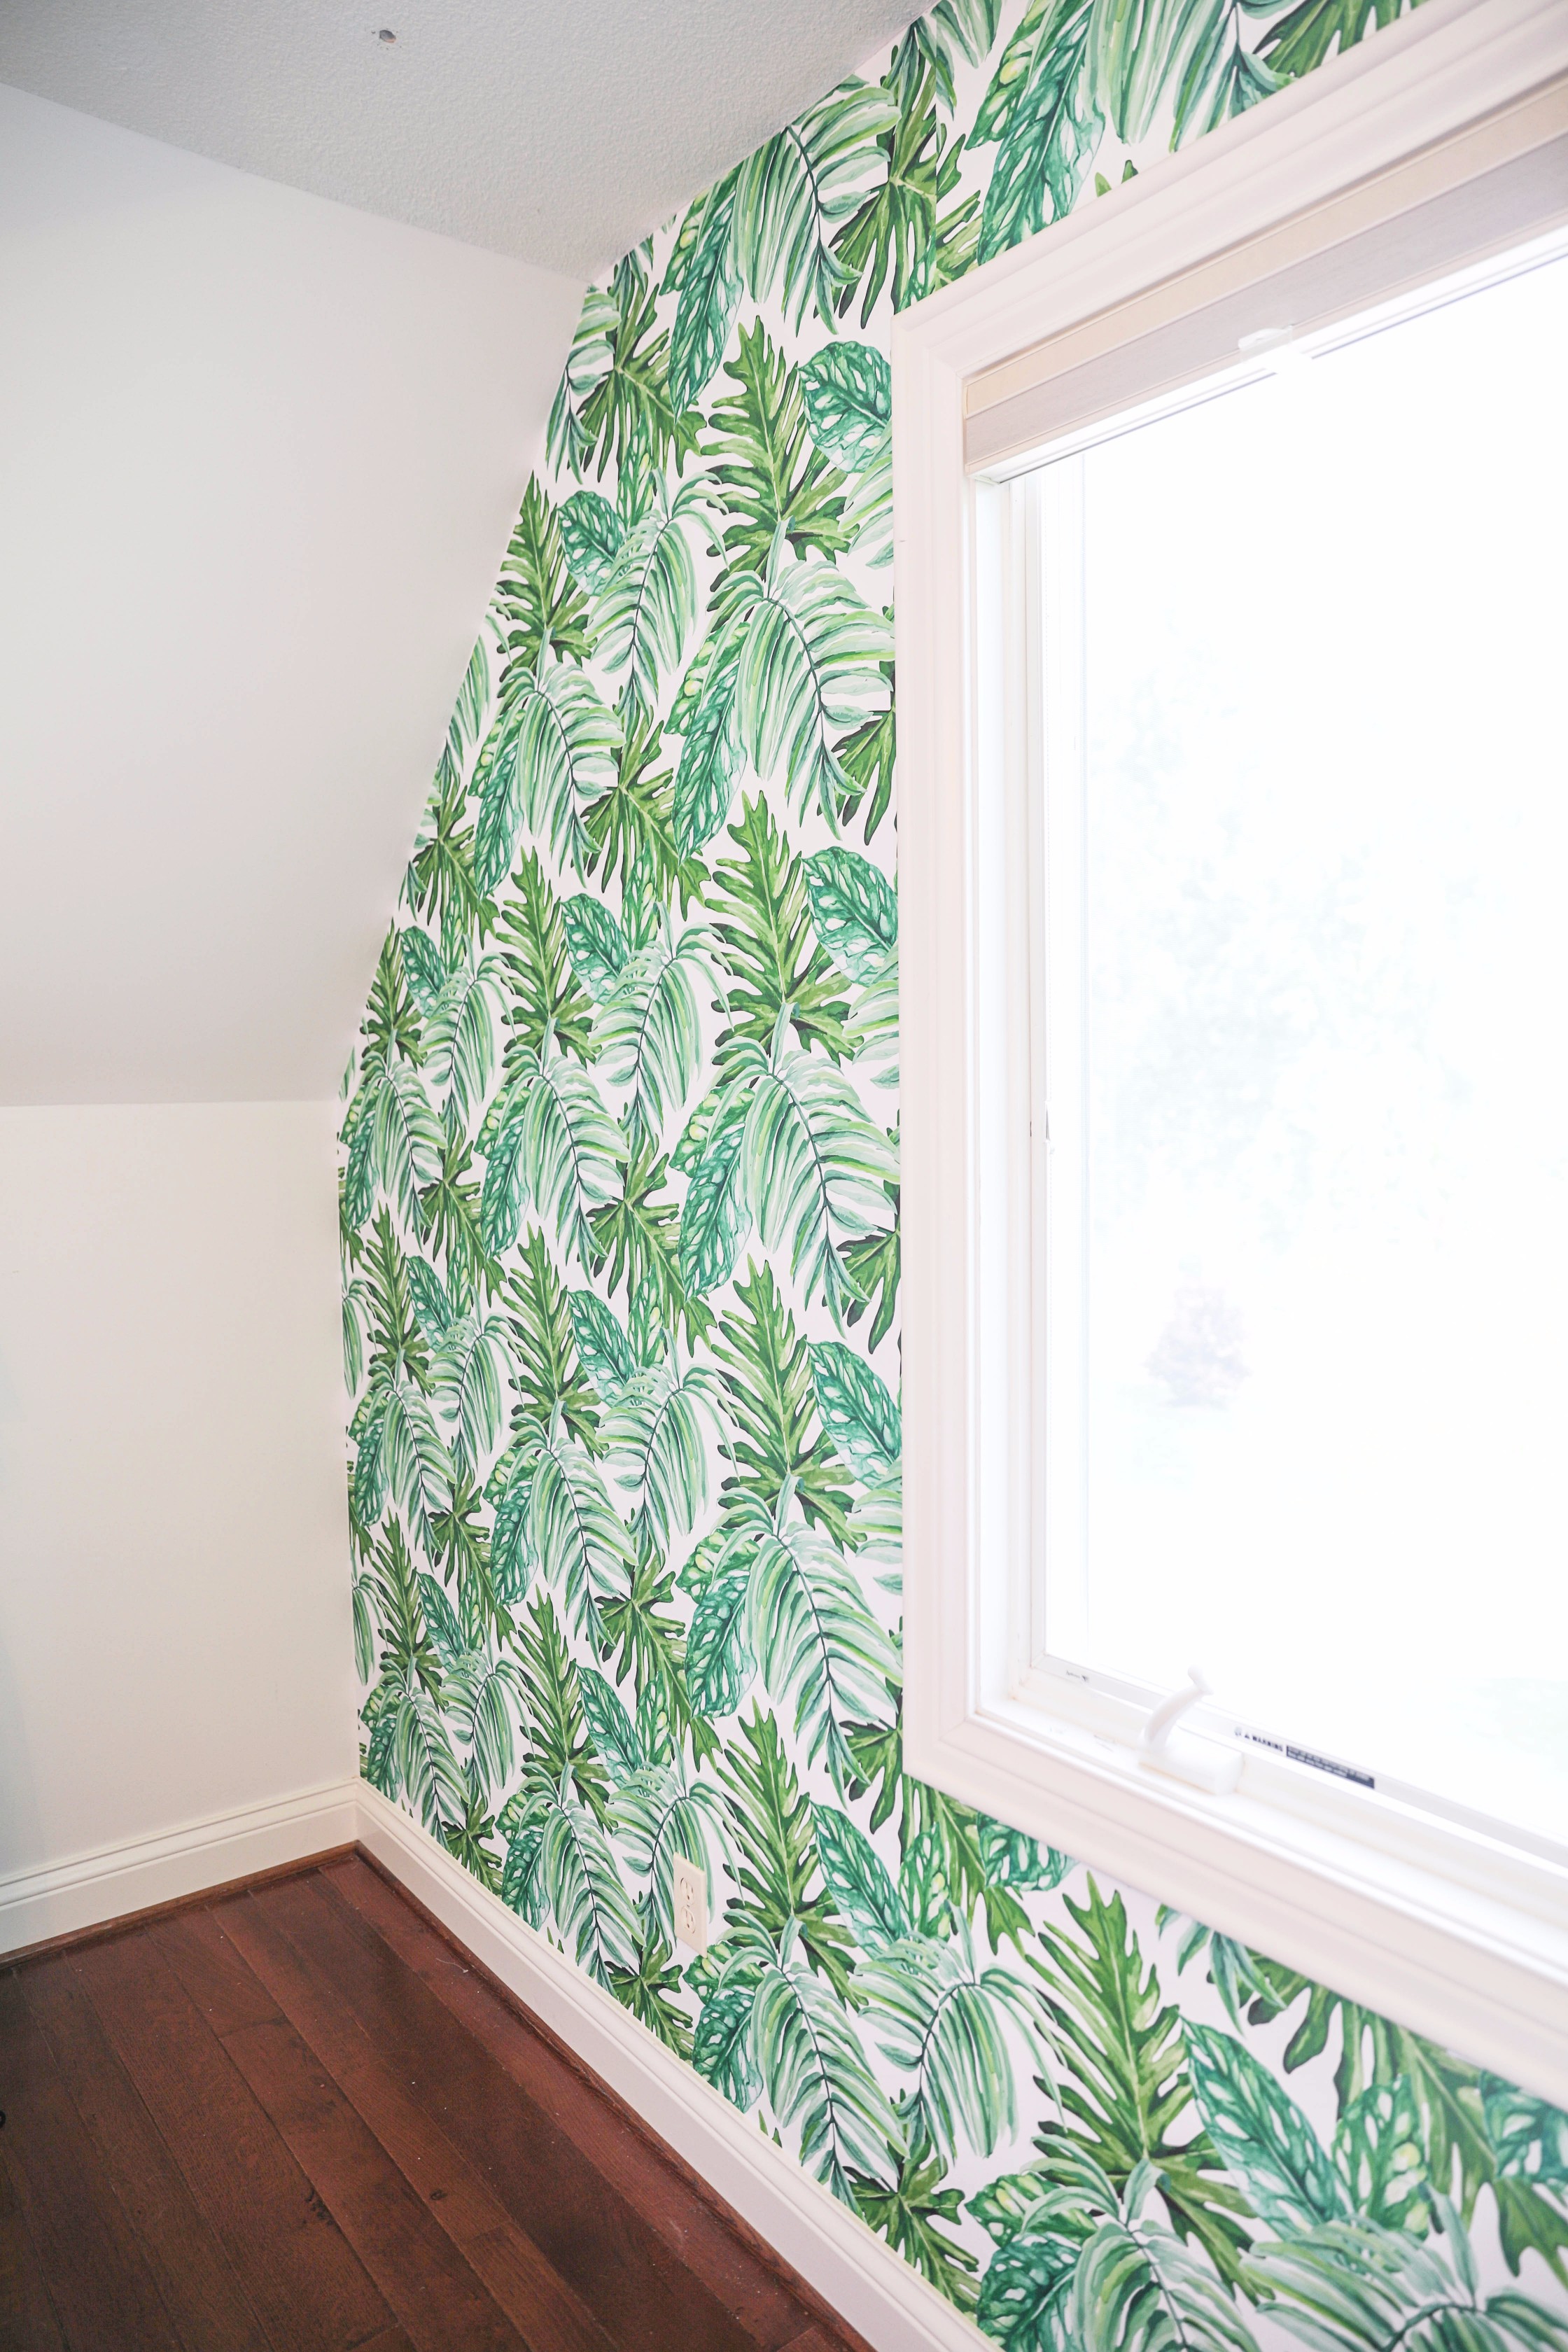 Palm Leaf Wallpaper as a statement wall. Cute palm leaf, tropical decor. Temporary and easy to put up and remove, on the blog daily dose of charm by lauren lindmark